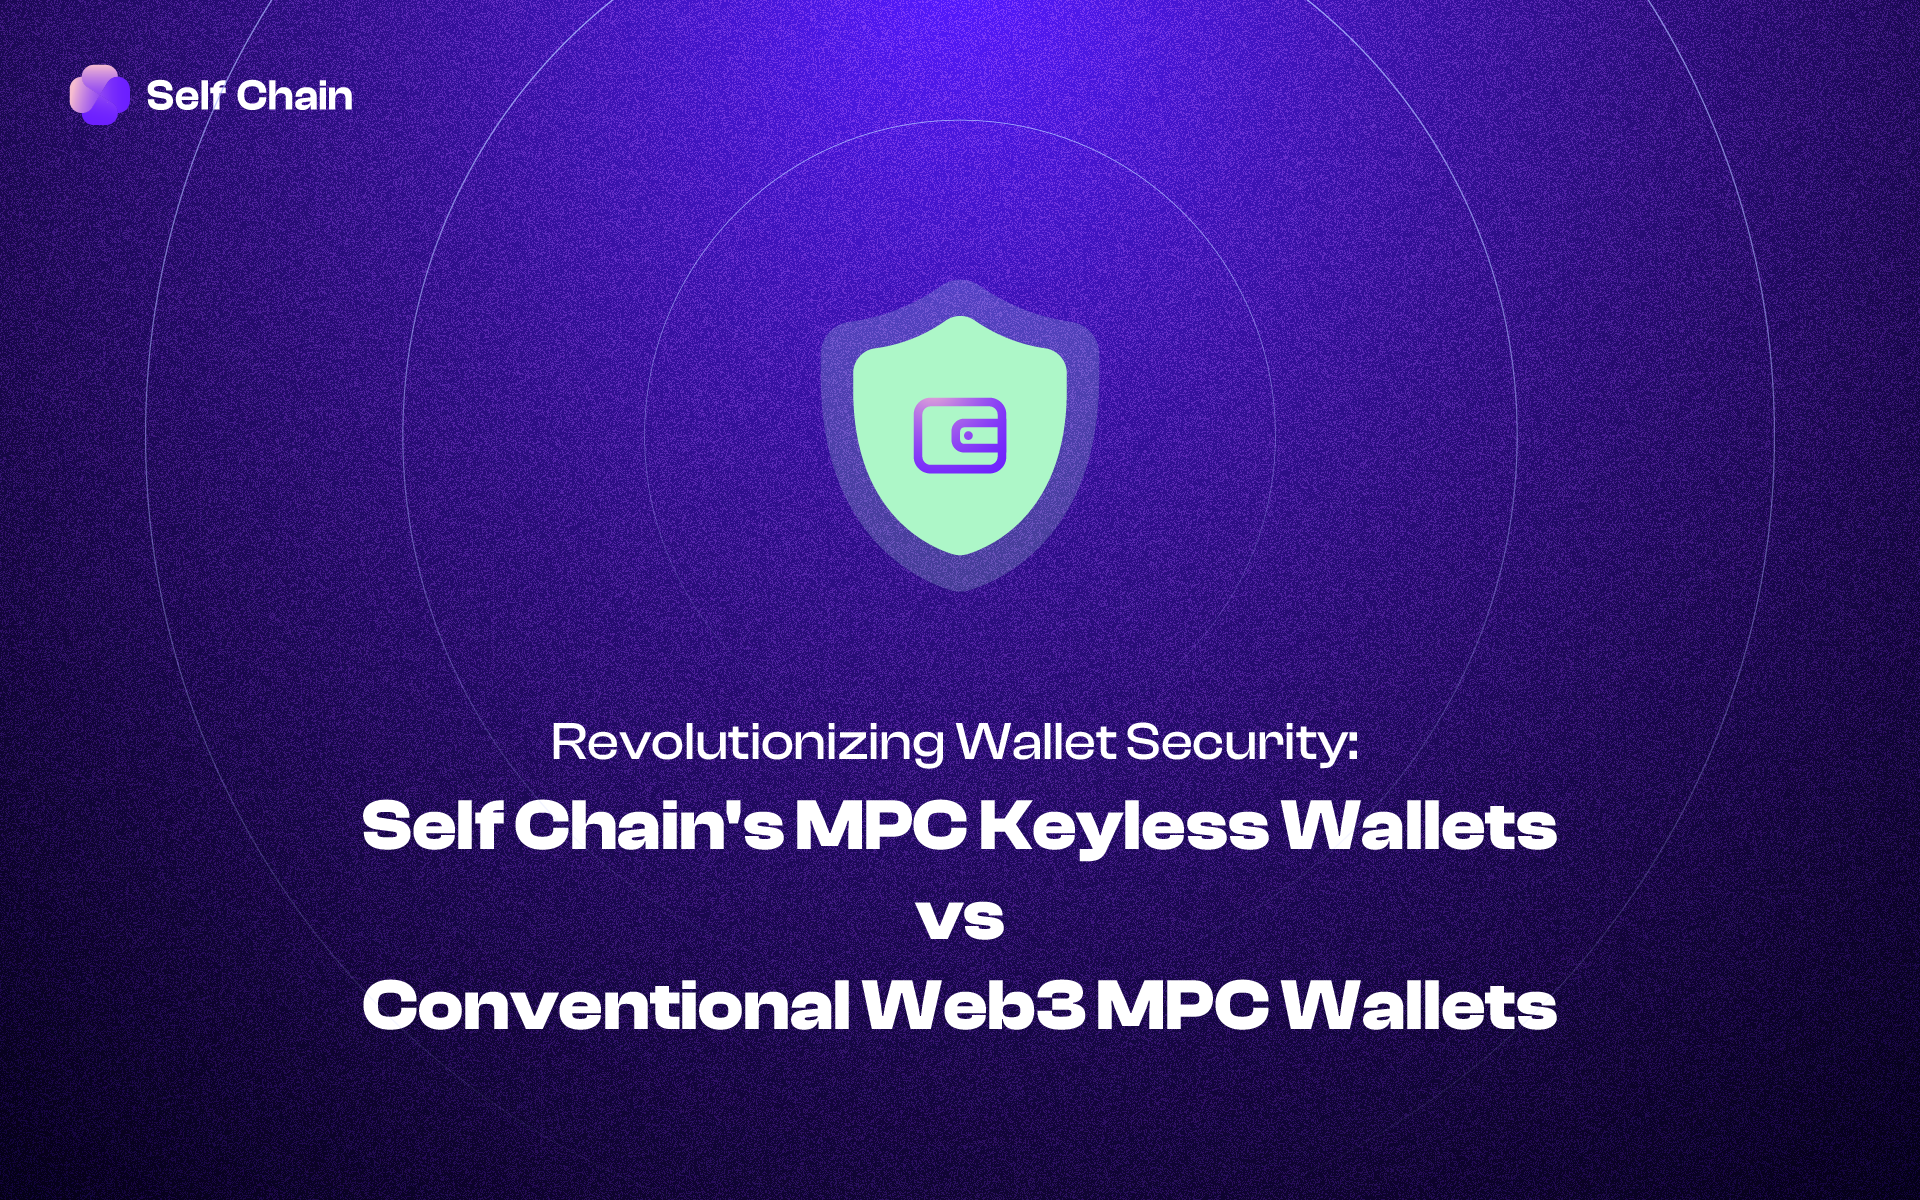 Revolutionizing Wallet Security: Self Chain's MPC Keyless Wallets vs Conventional Web3 MPC Wallets